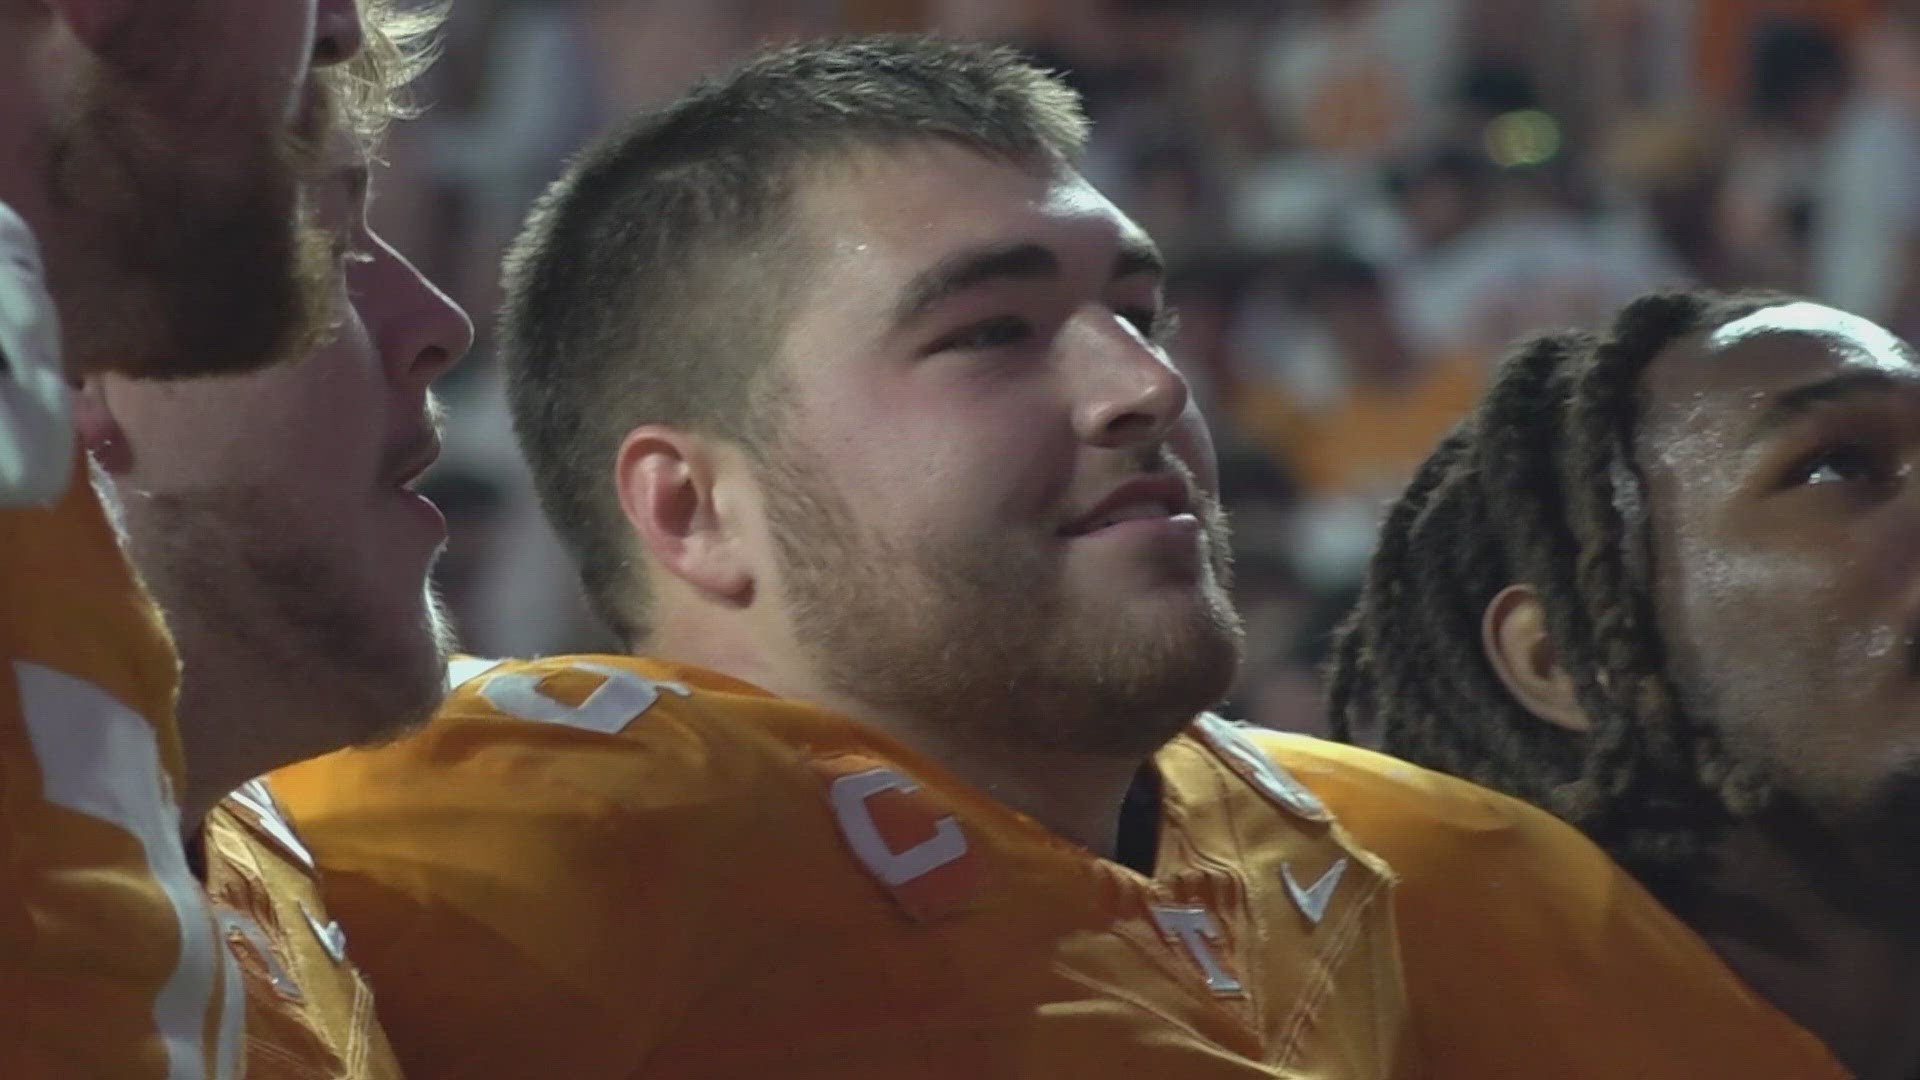 The Tennessee offensive lineman said on a podcast that he will not participate in Senior Day festivities before Tennessee's game against Vanderbilt.